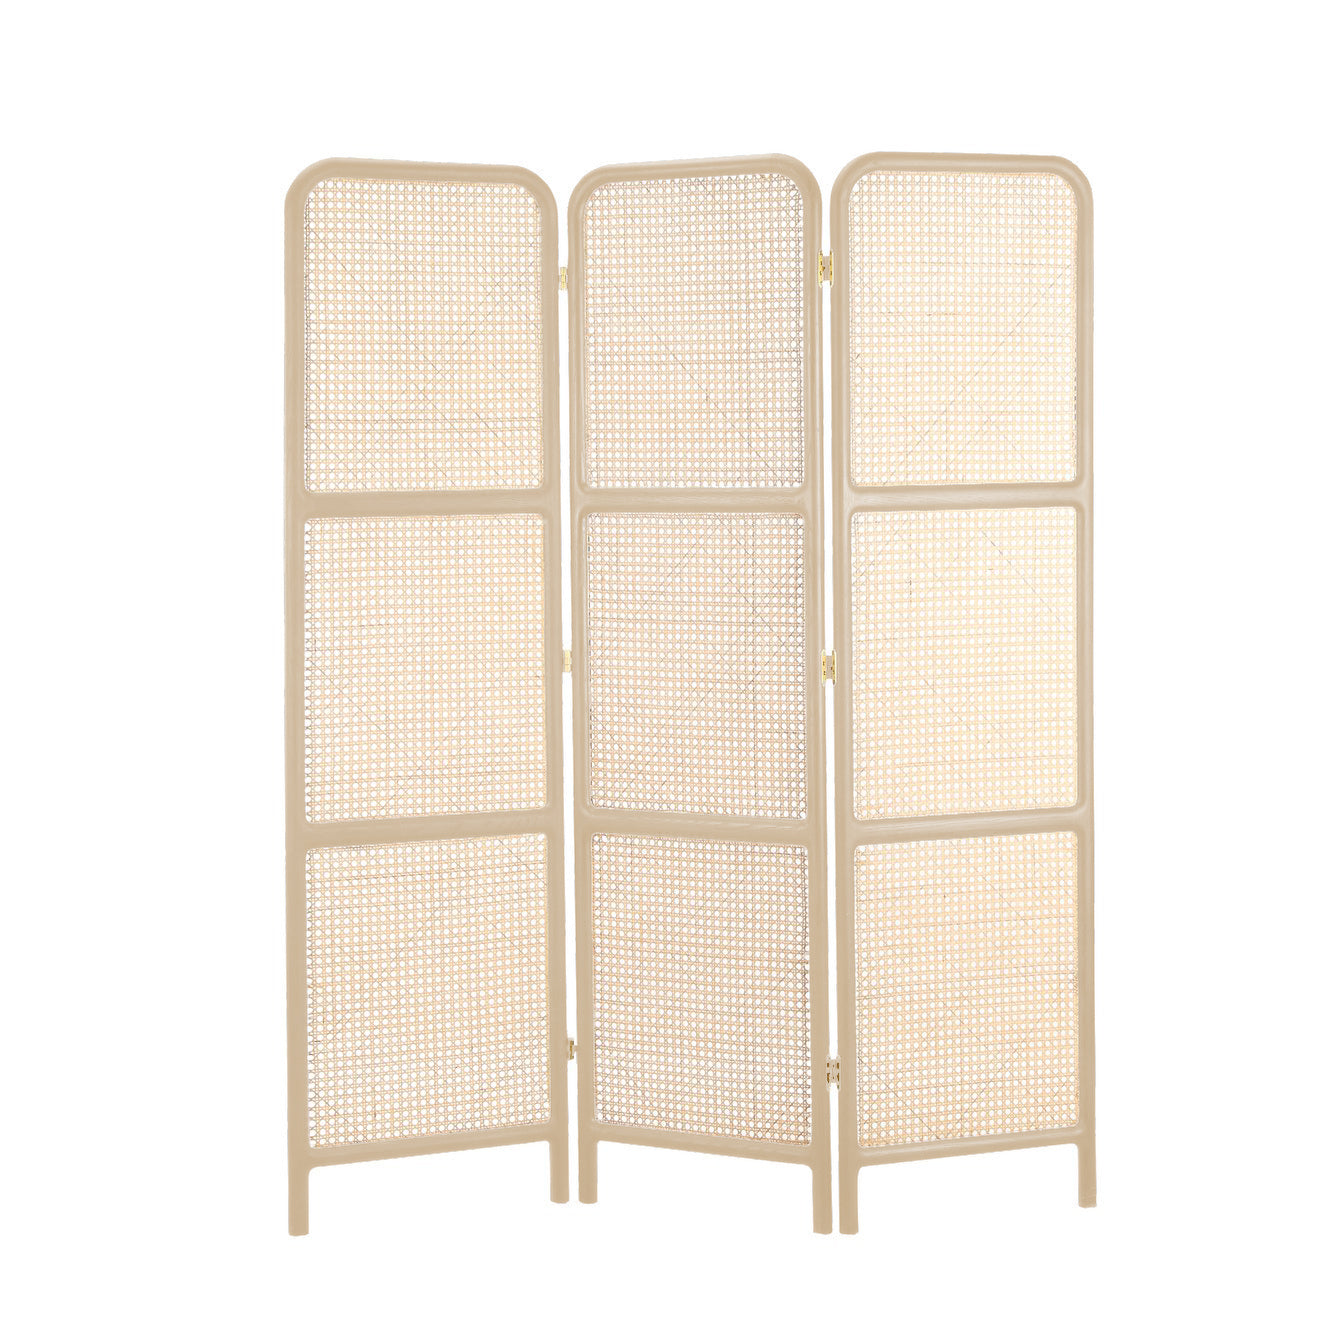 Soleil Screen, Washed White Ash - Image 1